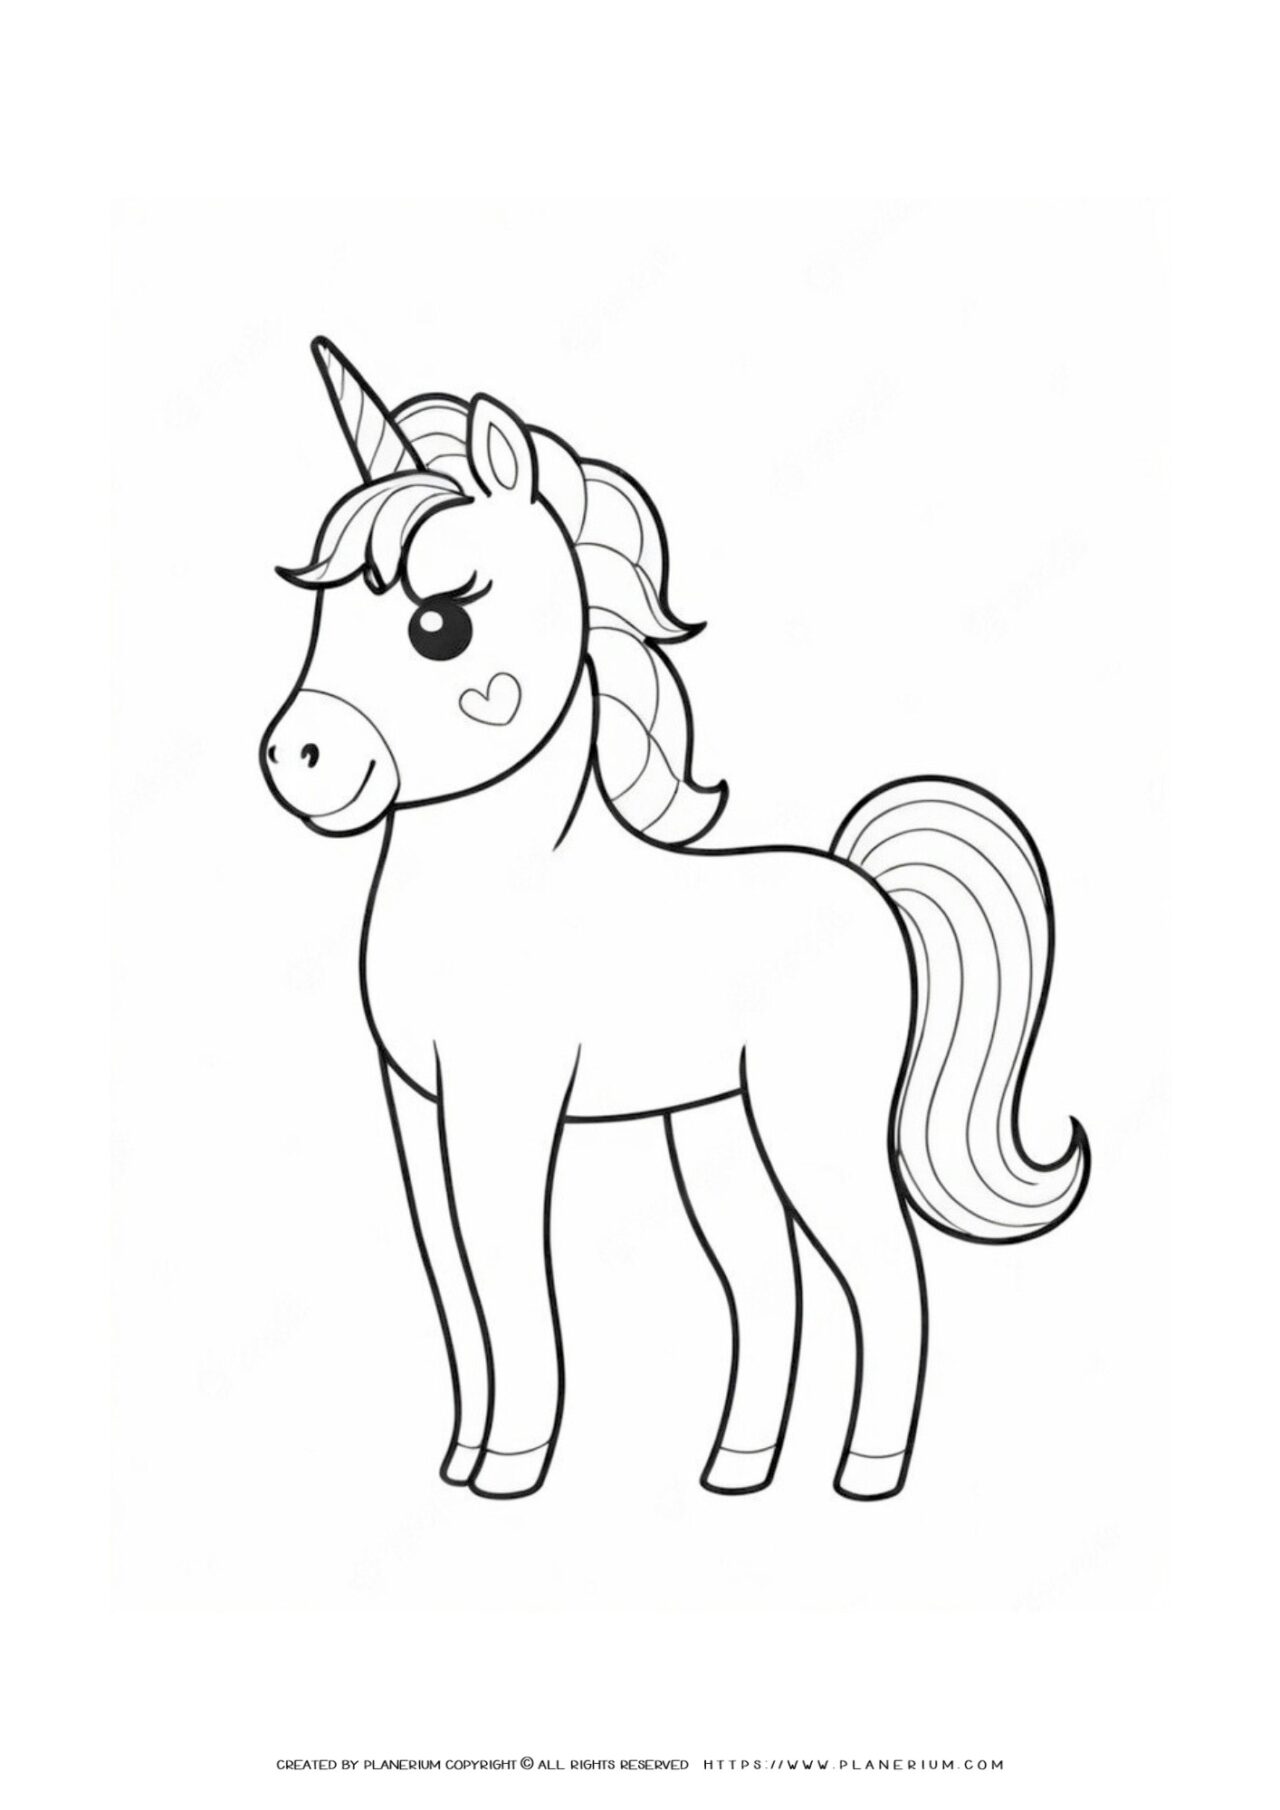 Unicorn coloring page for children's activity